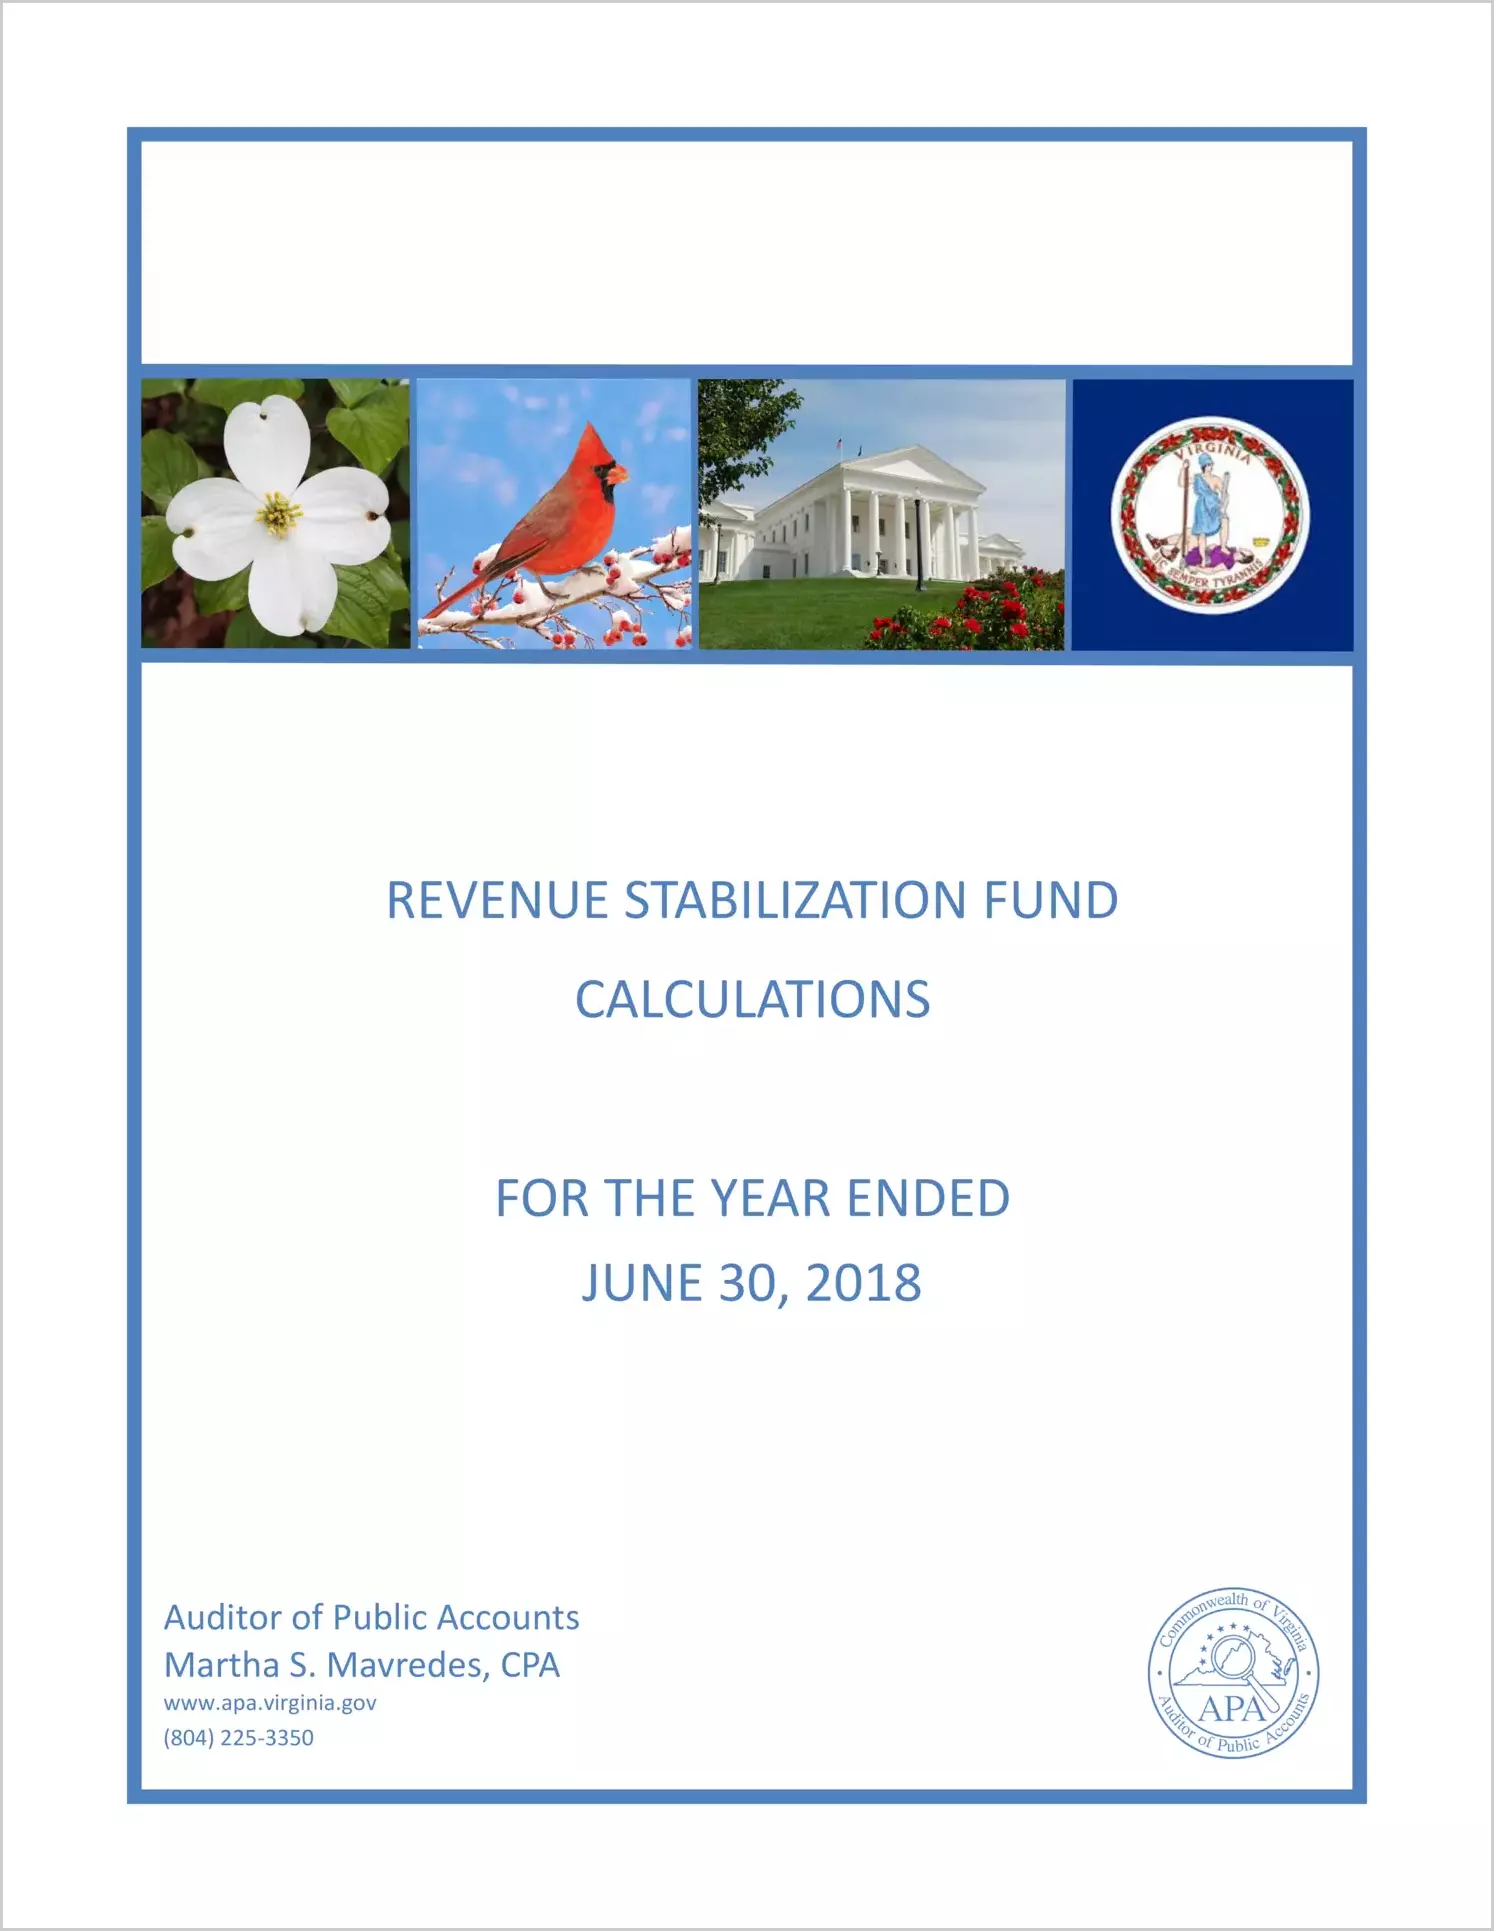 Revenue Stabilization Fund Calculations for the year ended June 30, 2018